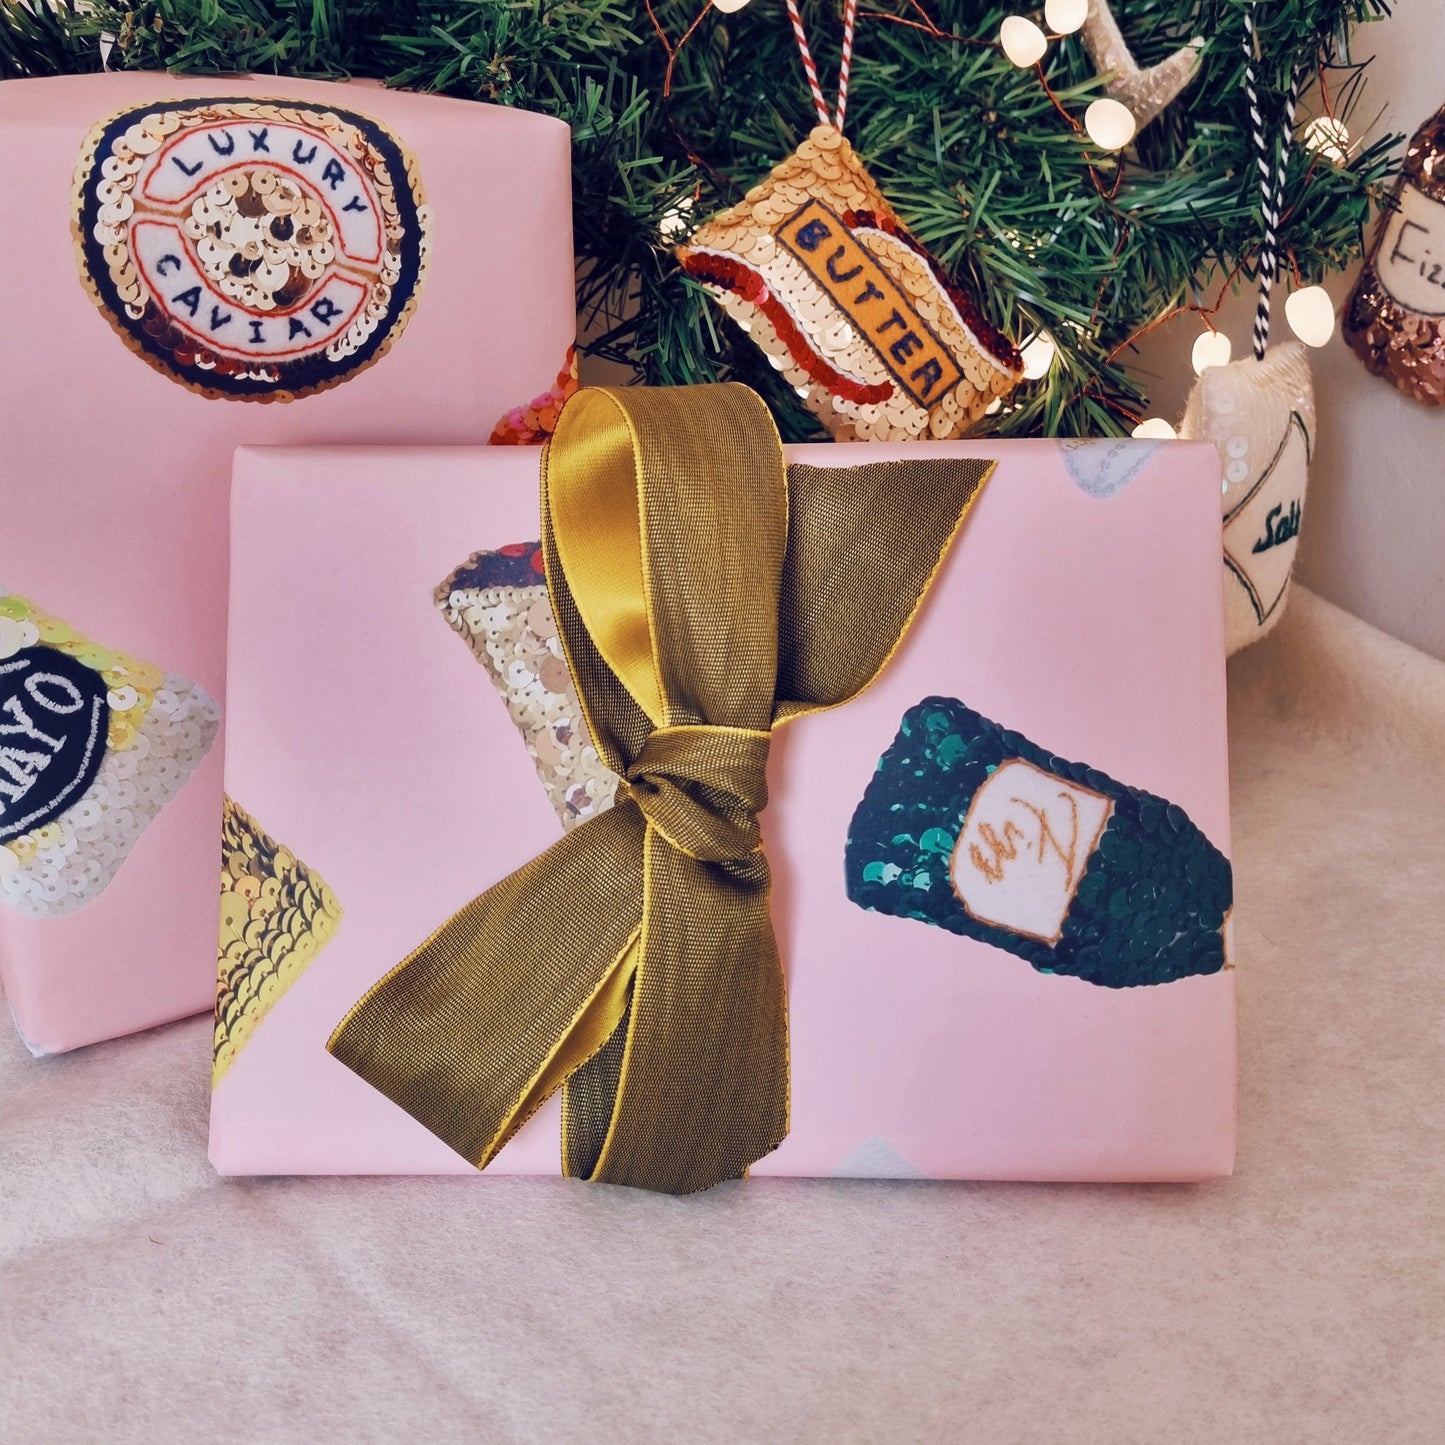 pink wrapping paper with sequin ornament images all over it wrapped up boxes under the tree